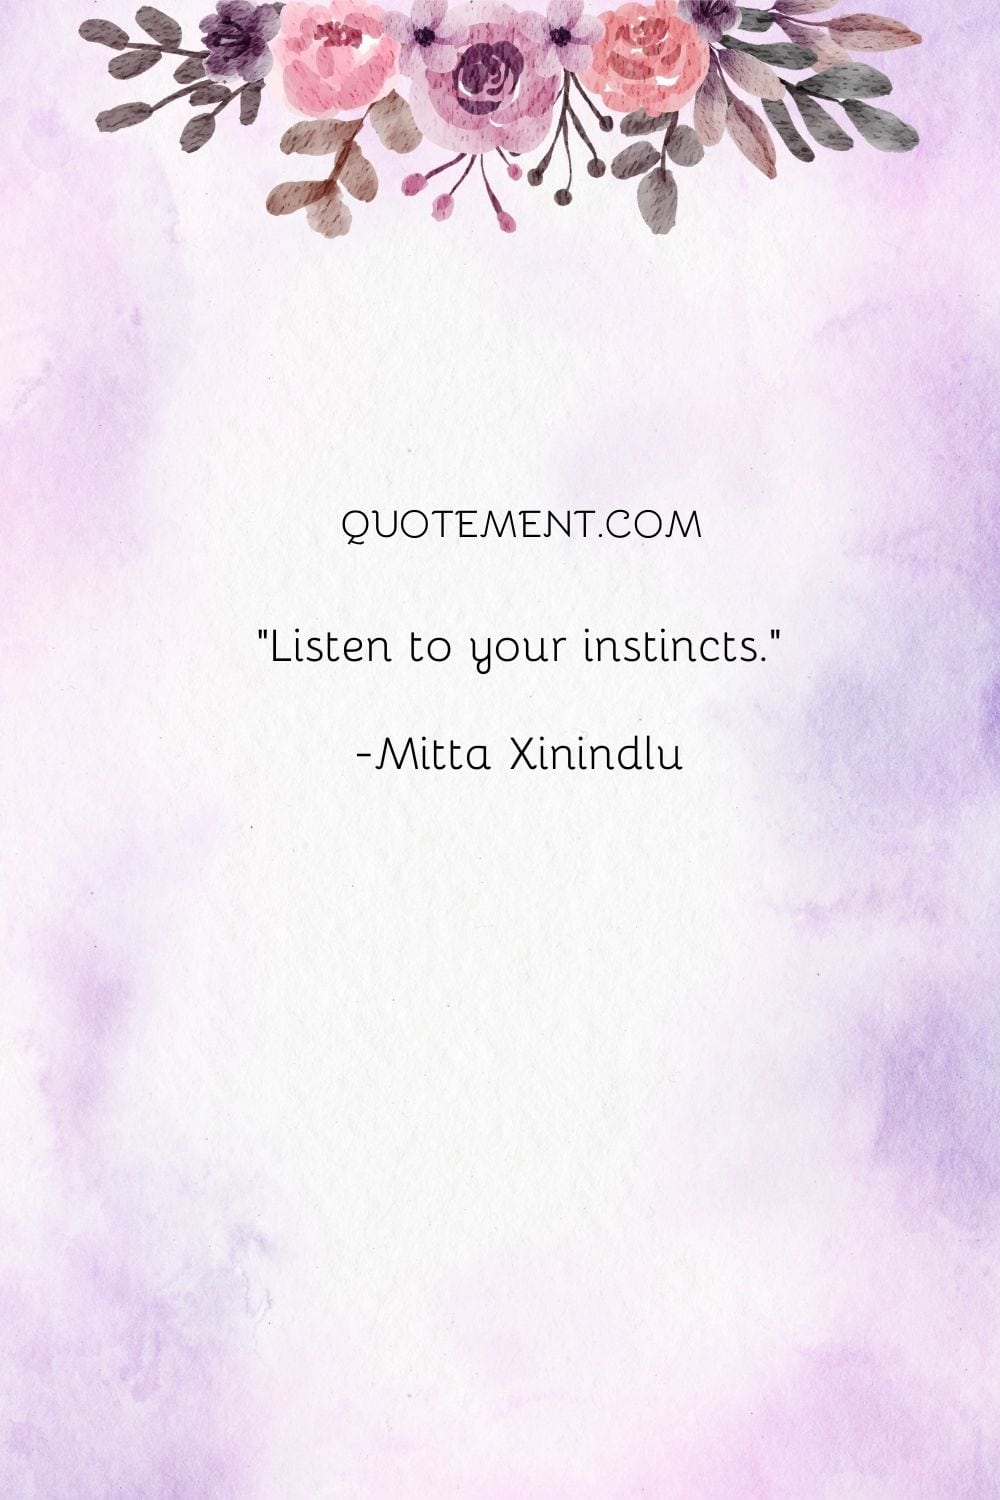 Listen to your instincts.